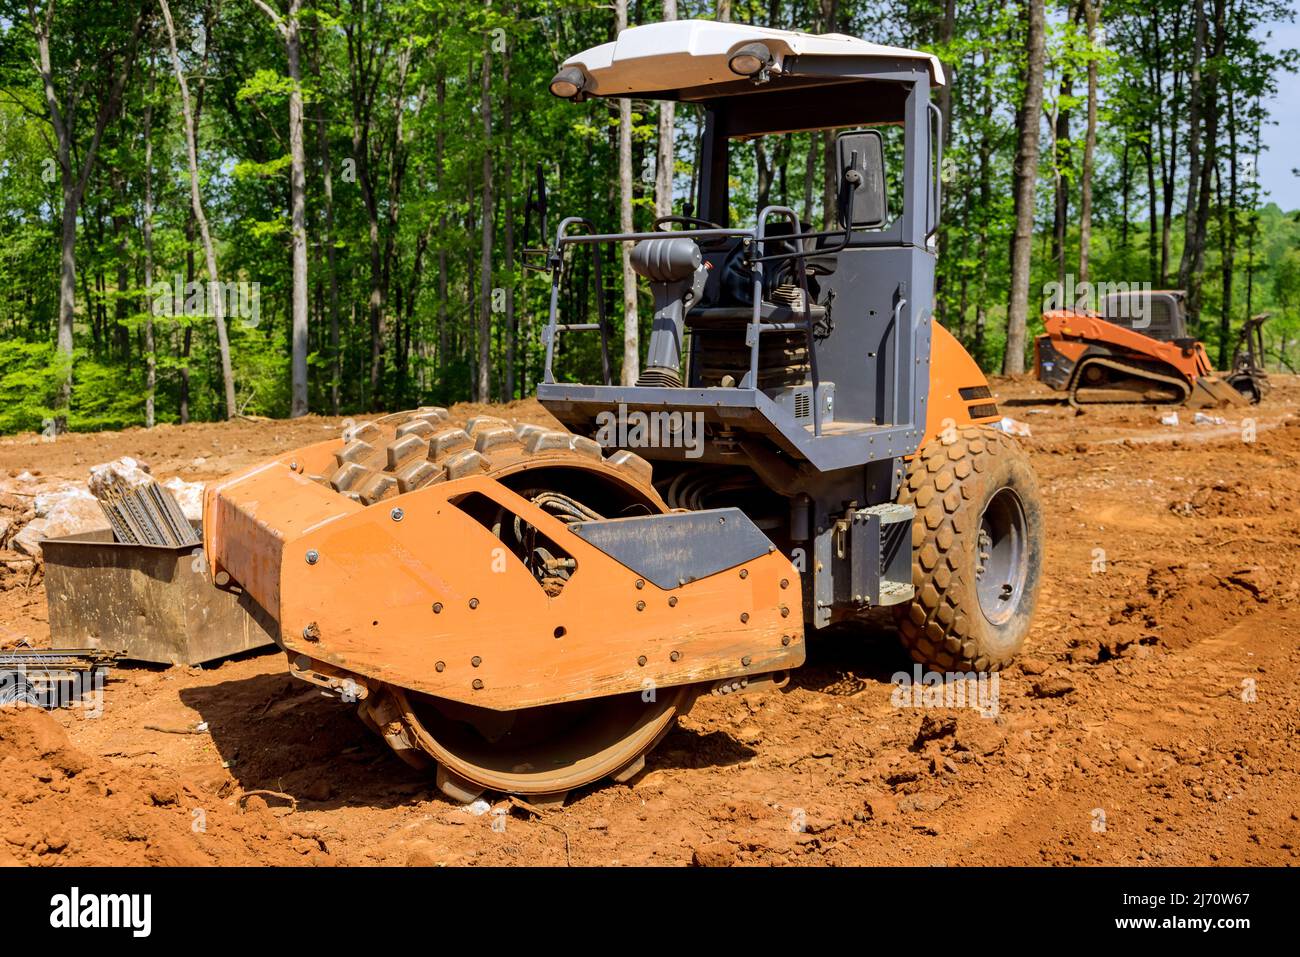 Heavy tractor machinery excavator align the earth doing landscaping Stock Photo